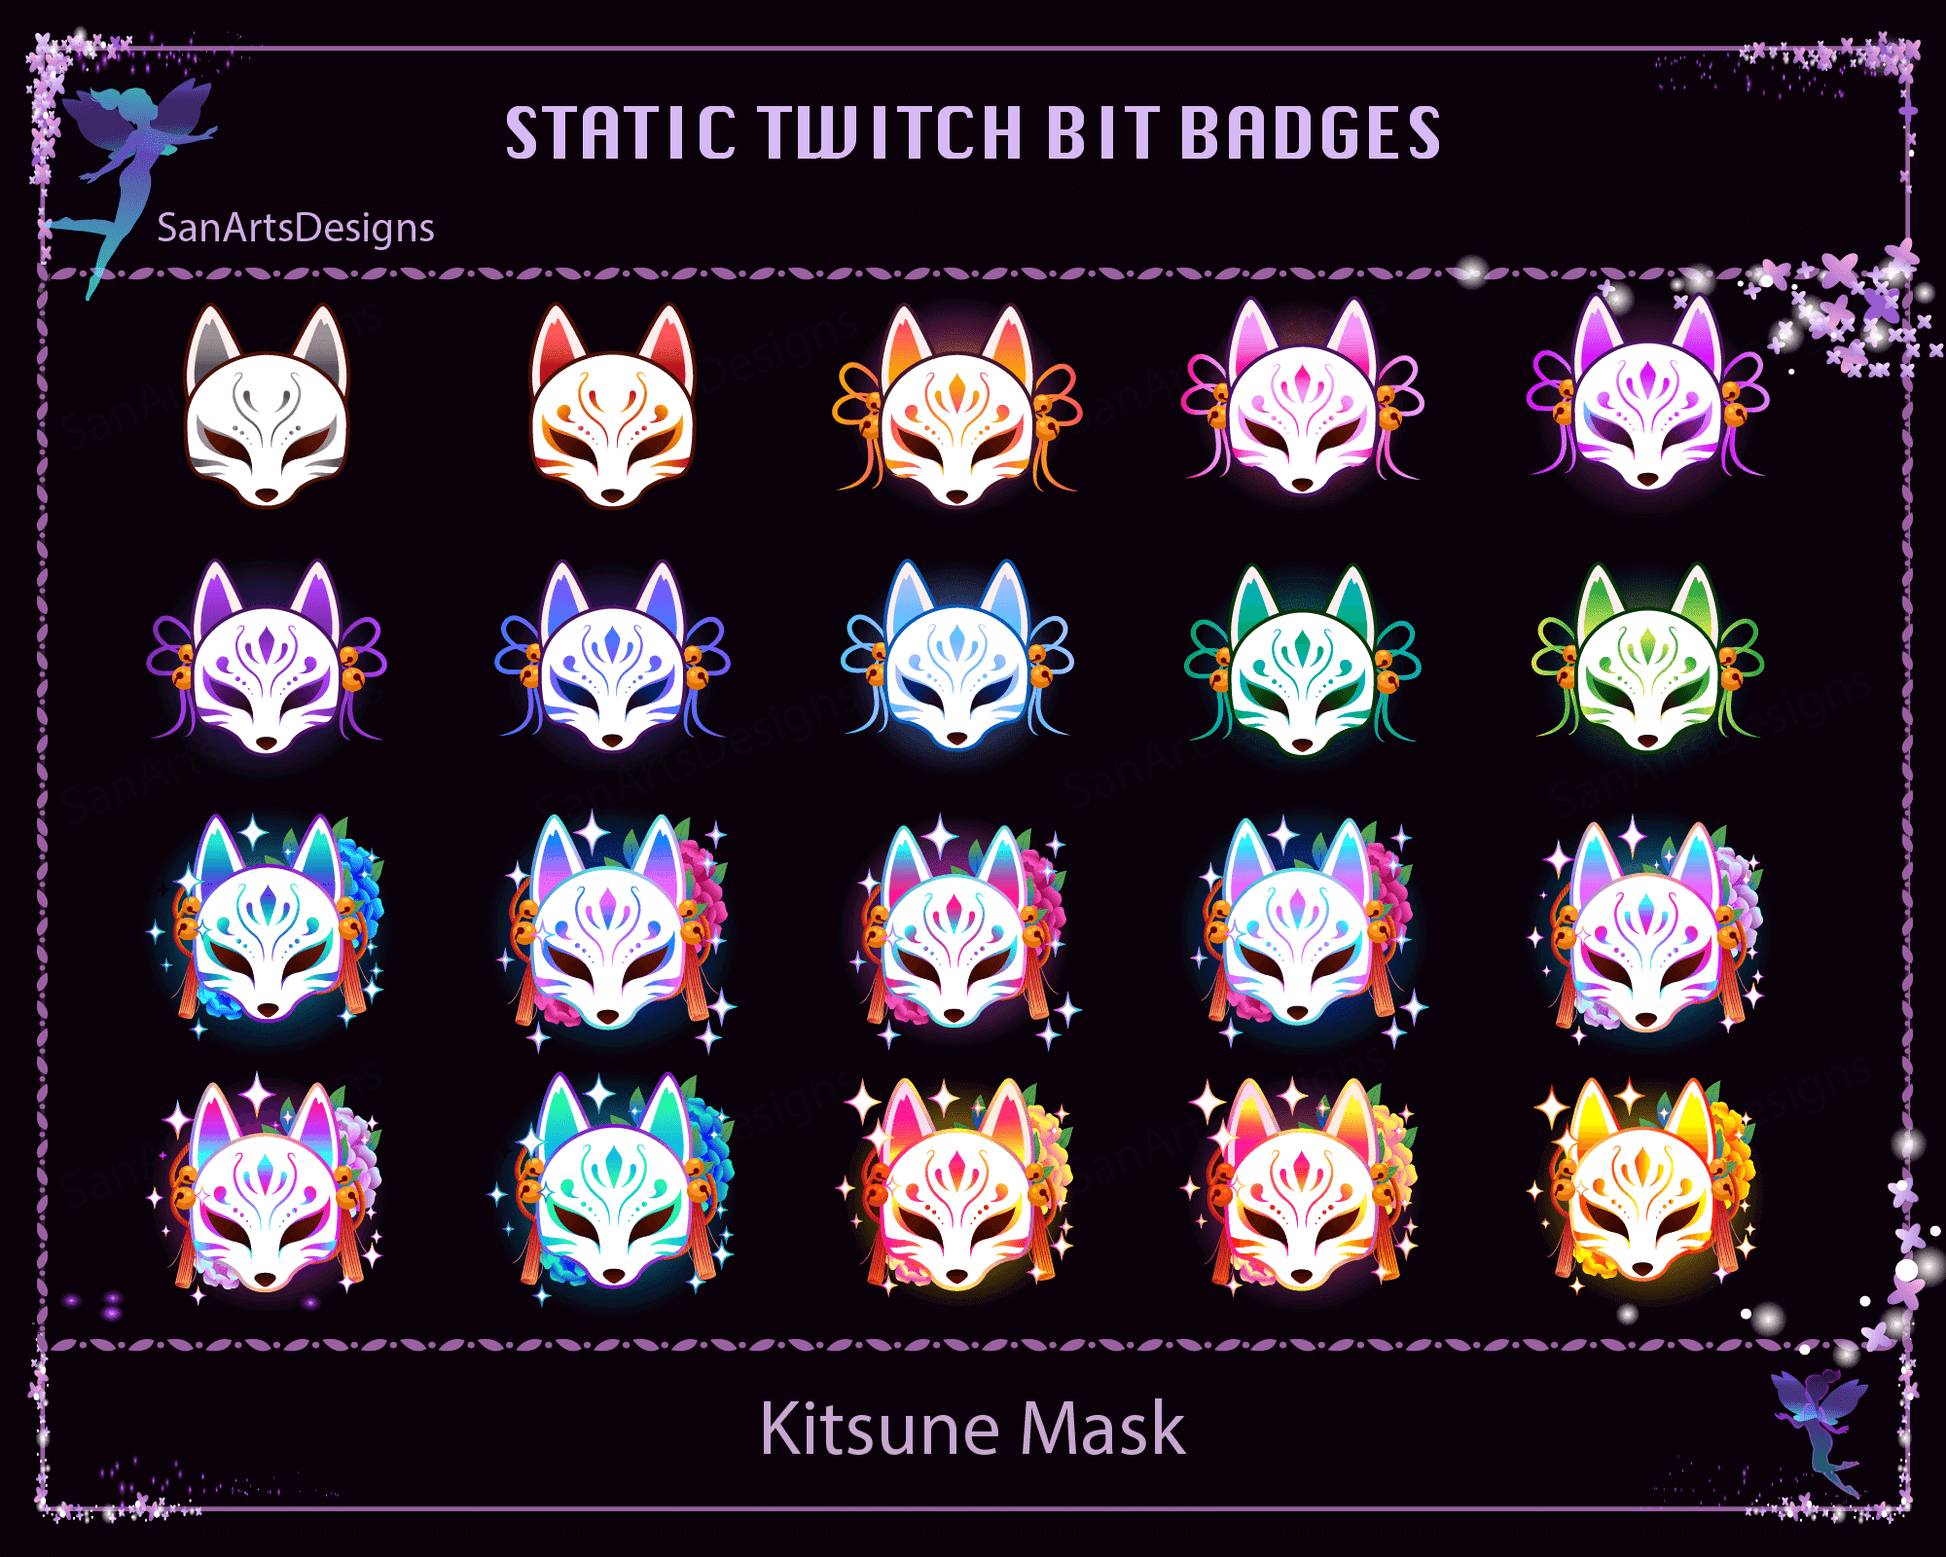 Bits Badges For Twitch, Subscribe Badges, Cheer Badges, Numbers